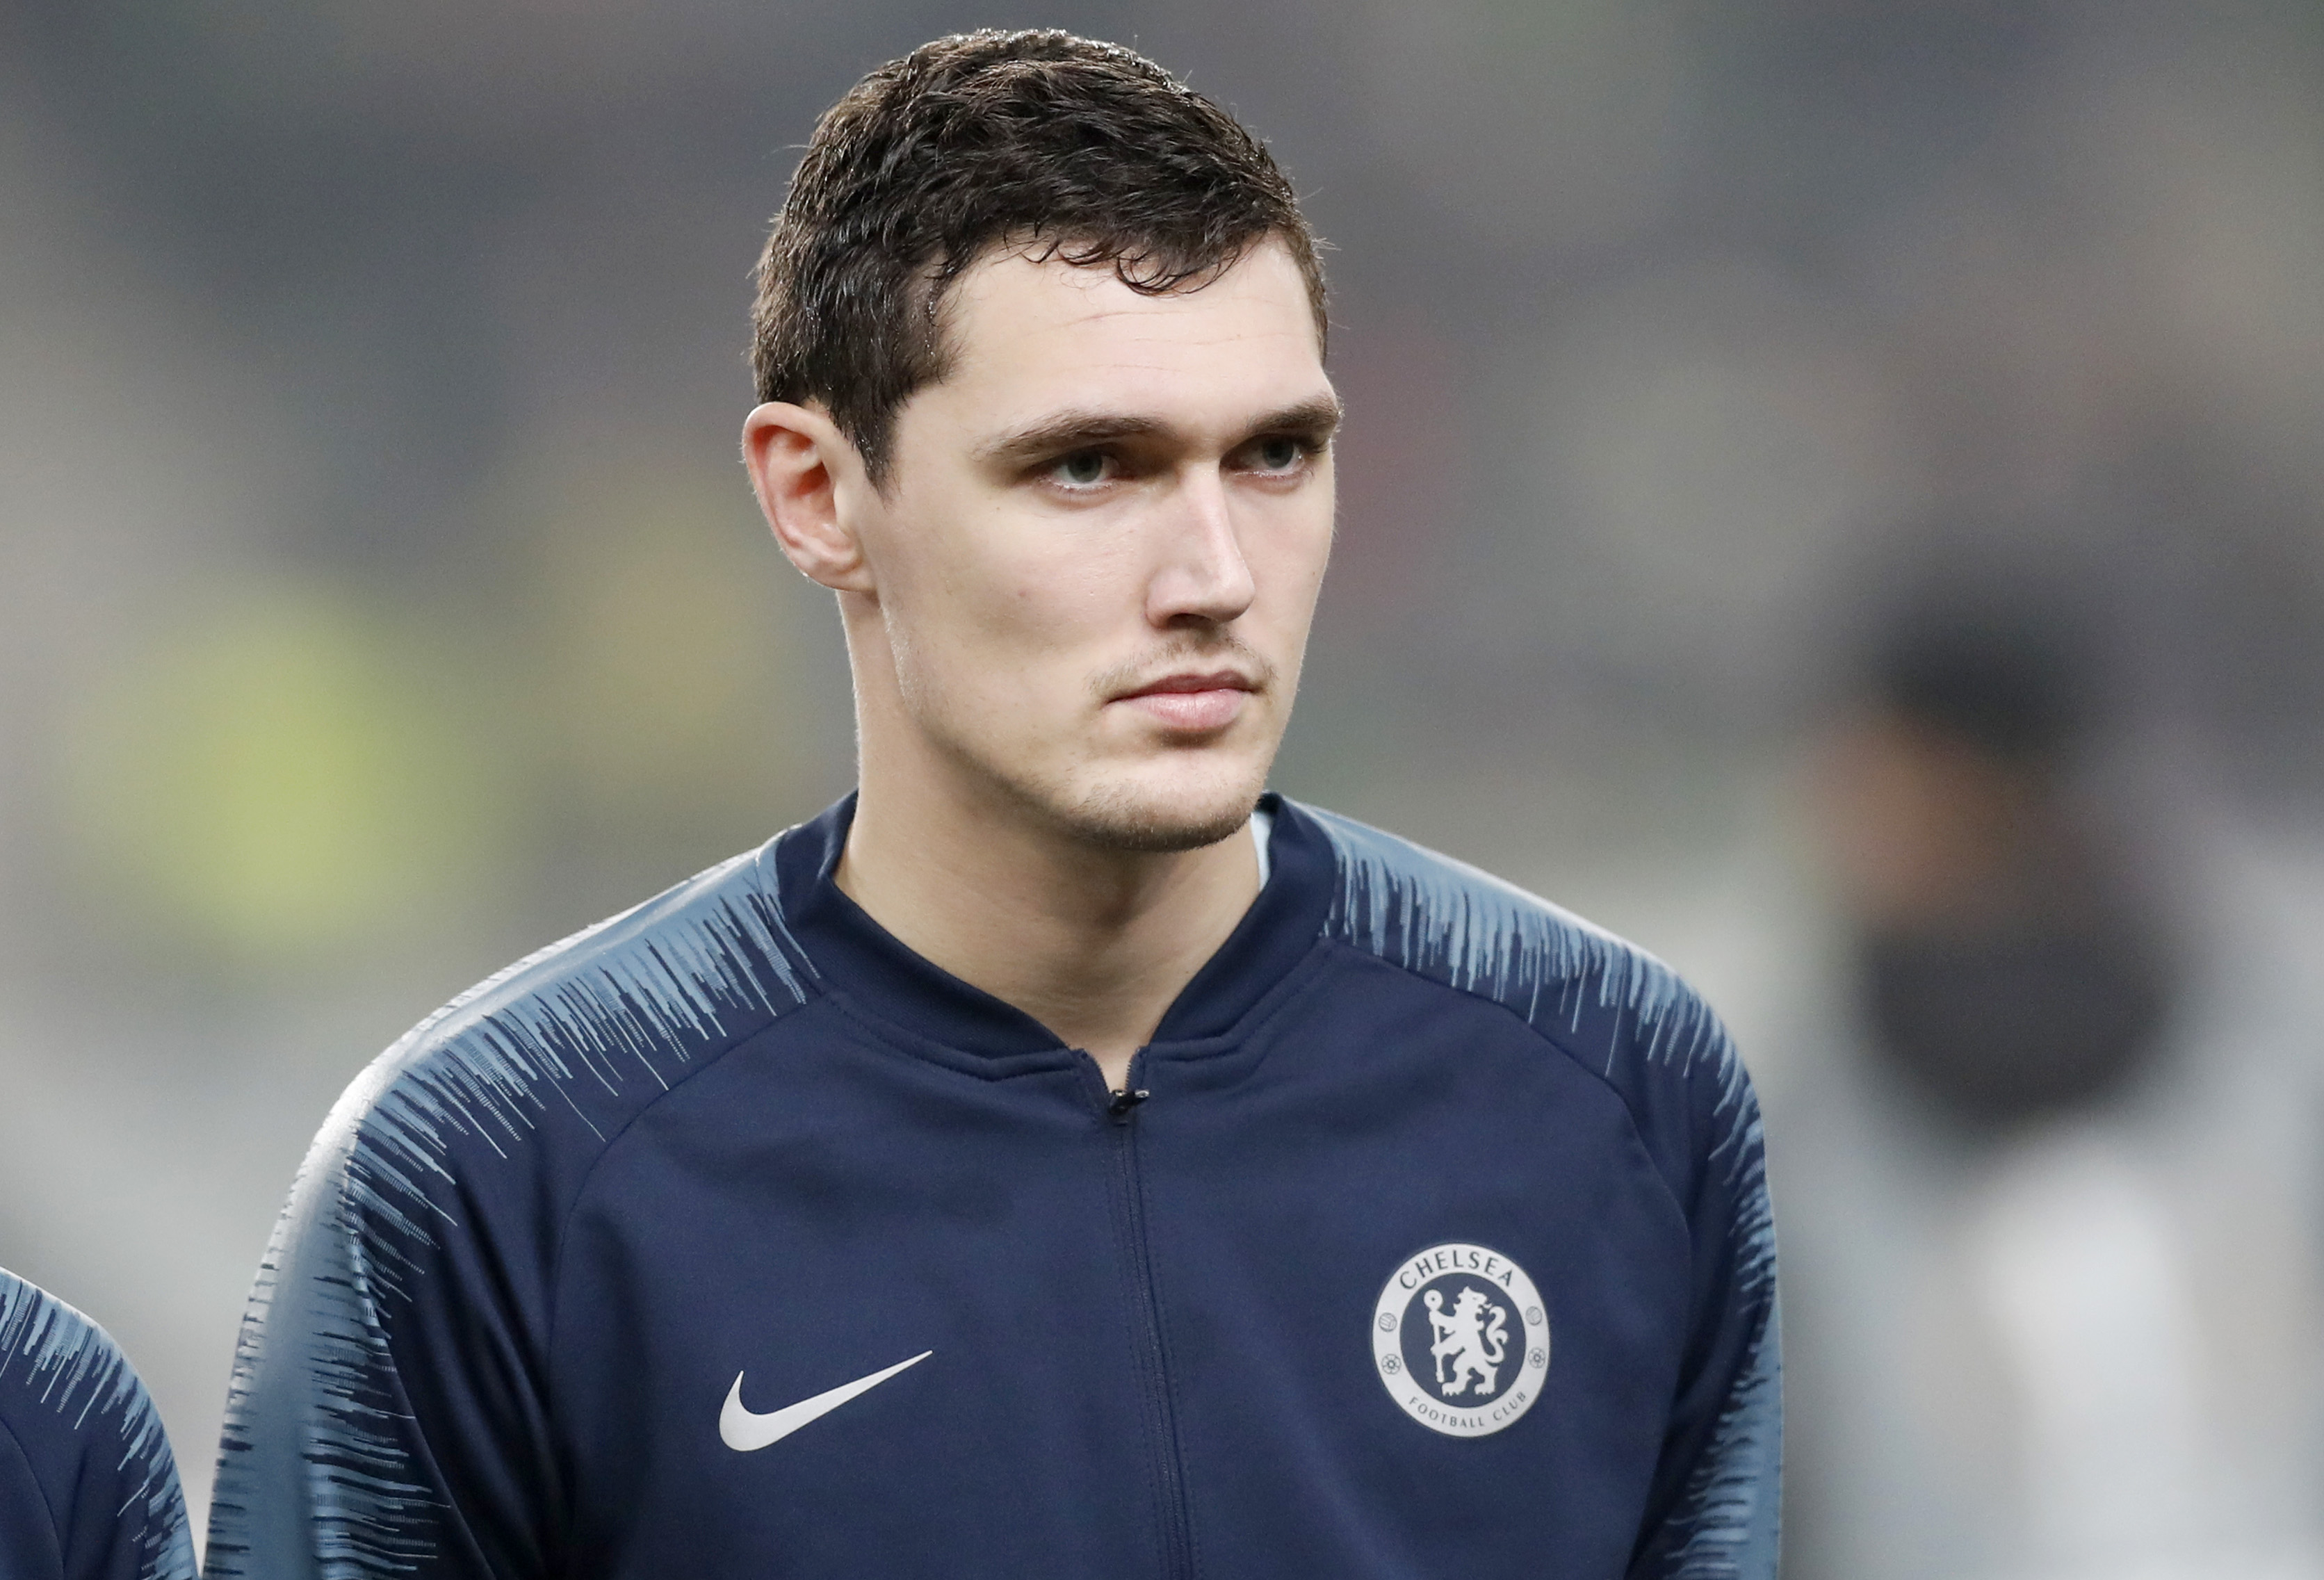 BUDAPEST, HUNGARY - DECEMBER 13: Andreas Christensen of Chelsea FC waits for the kick-off prior to the UEFA Europa League Group Stage Match between Vidi FC and Chelsea FC at Ferencvaros Stadium on December 13, 2018 in Budapest, Hungary. (Photo by Laszlo Szirtesi/Getty Images)